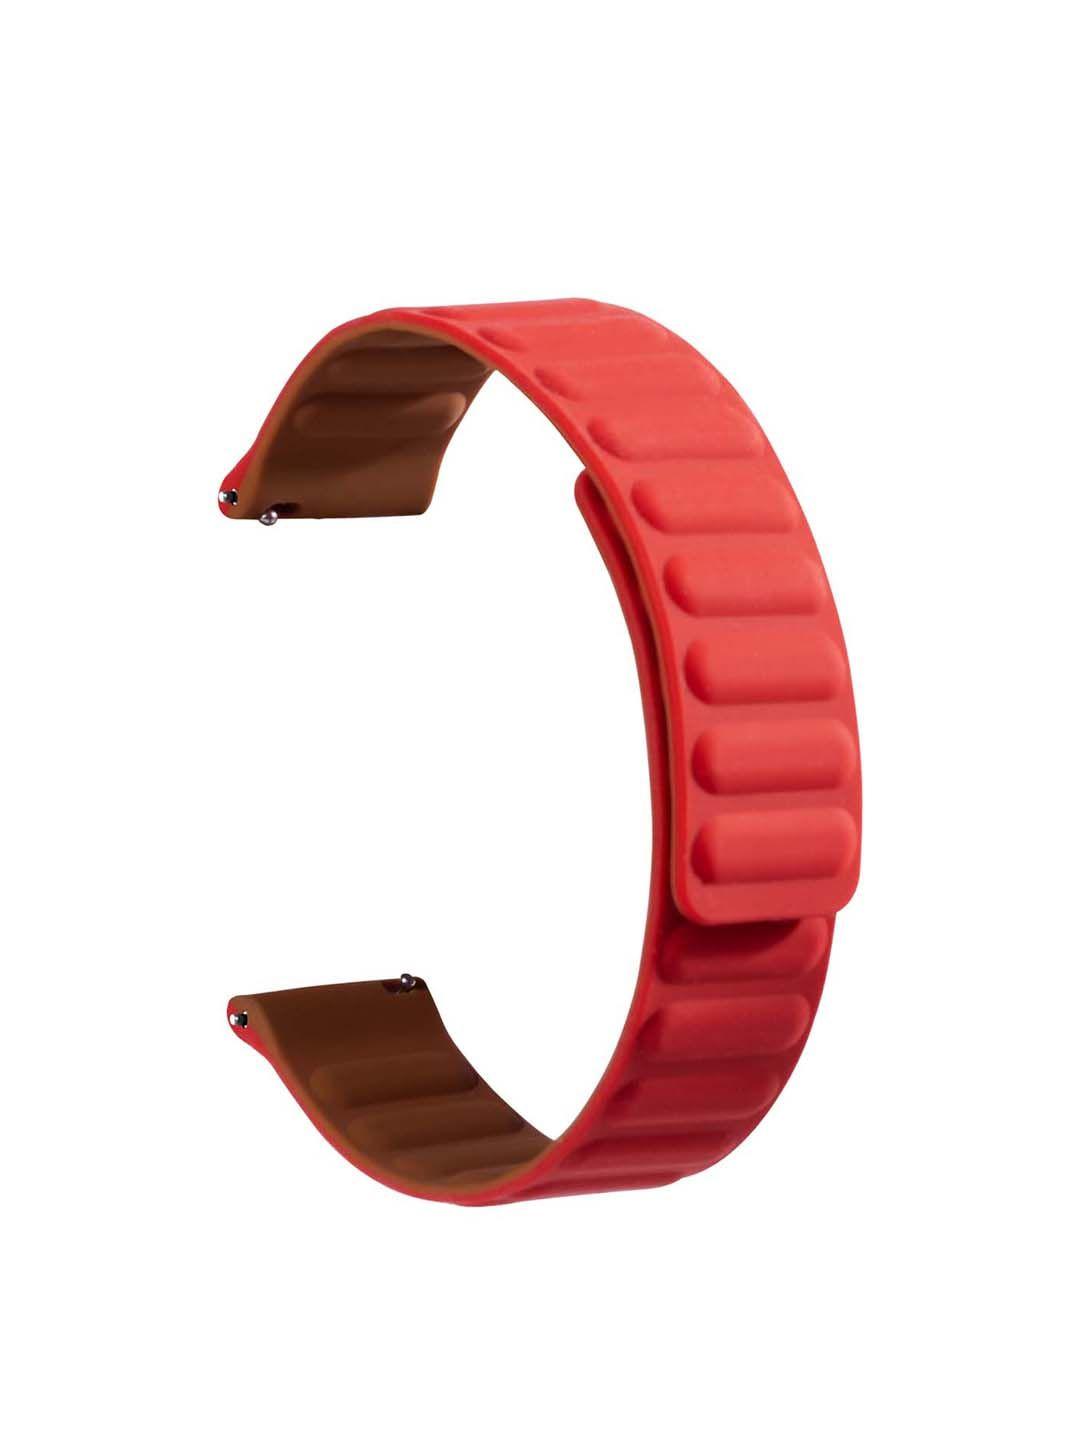 dailyobjects textured silicone smartwatch strap